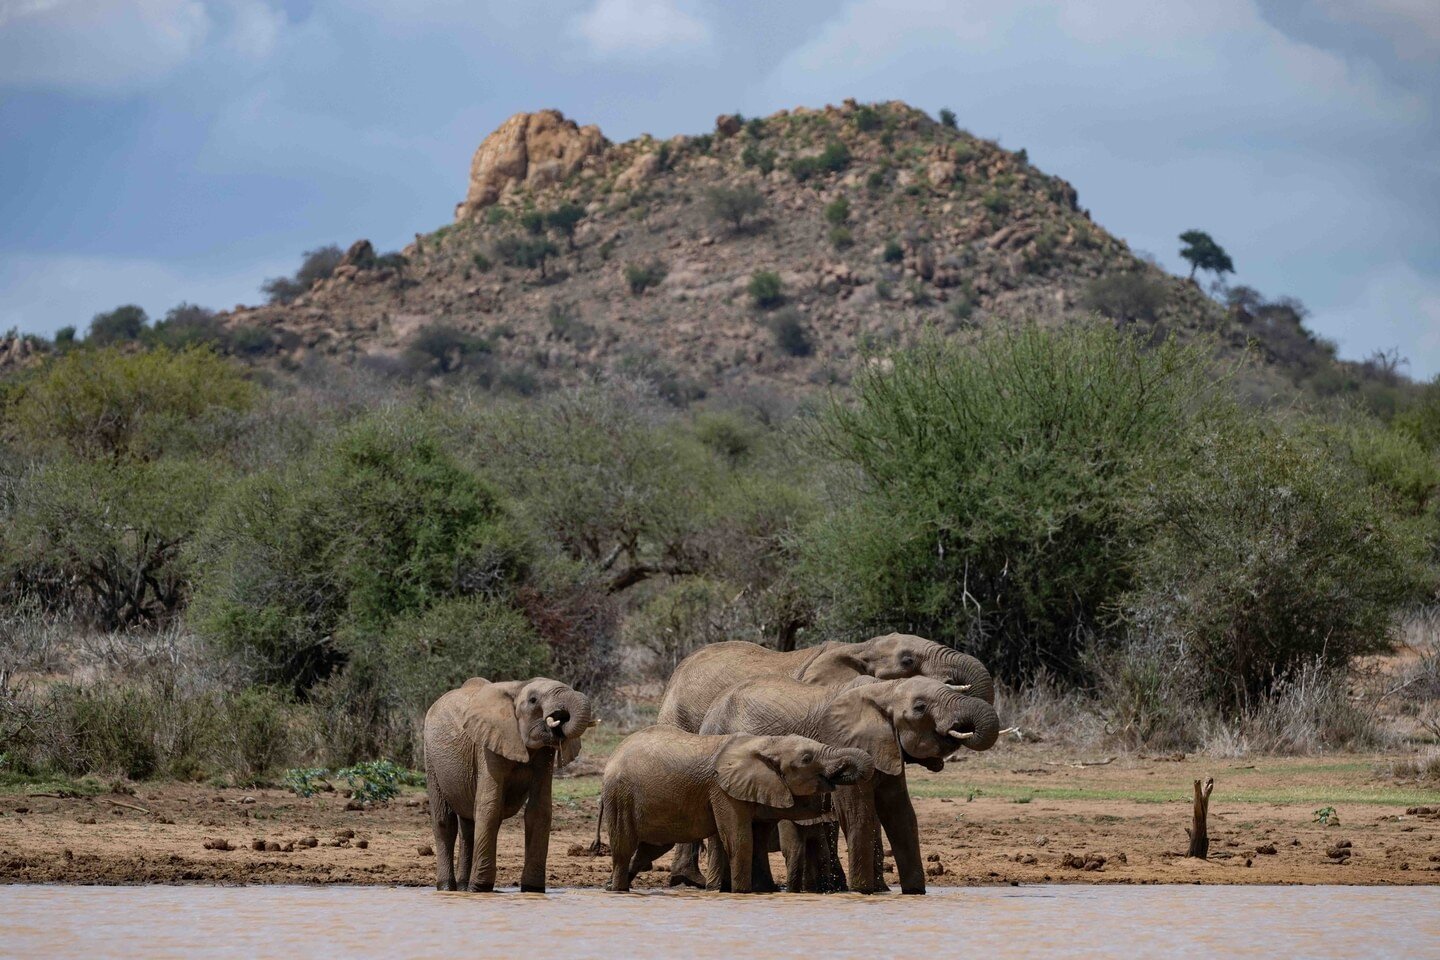 Elephants live in tightly-bonded female-led herds. This is led by the oldest and often largest female in the herd called a matriarch. We often enjoy sitting at dams and watching the different herds take their turn to drink. What better way to spend a